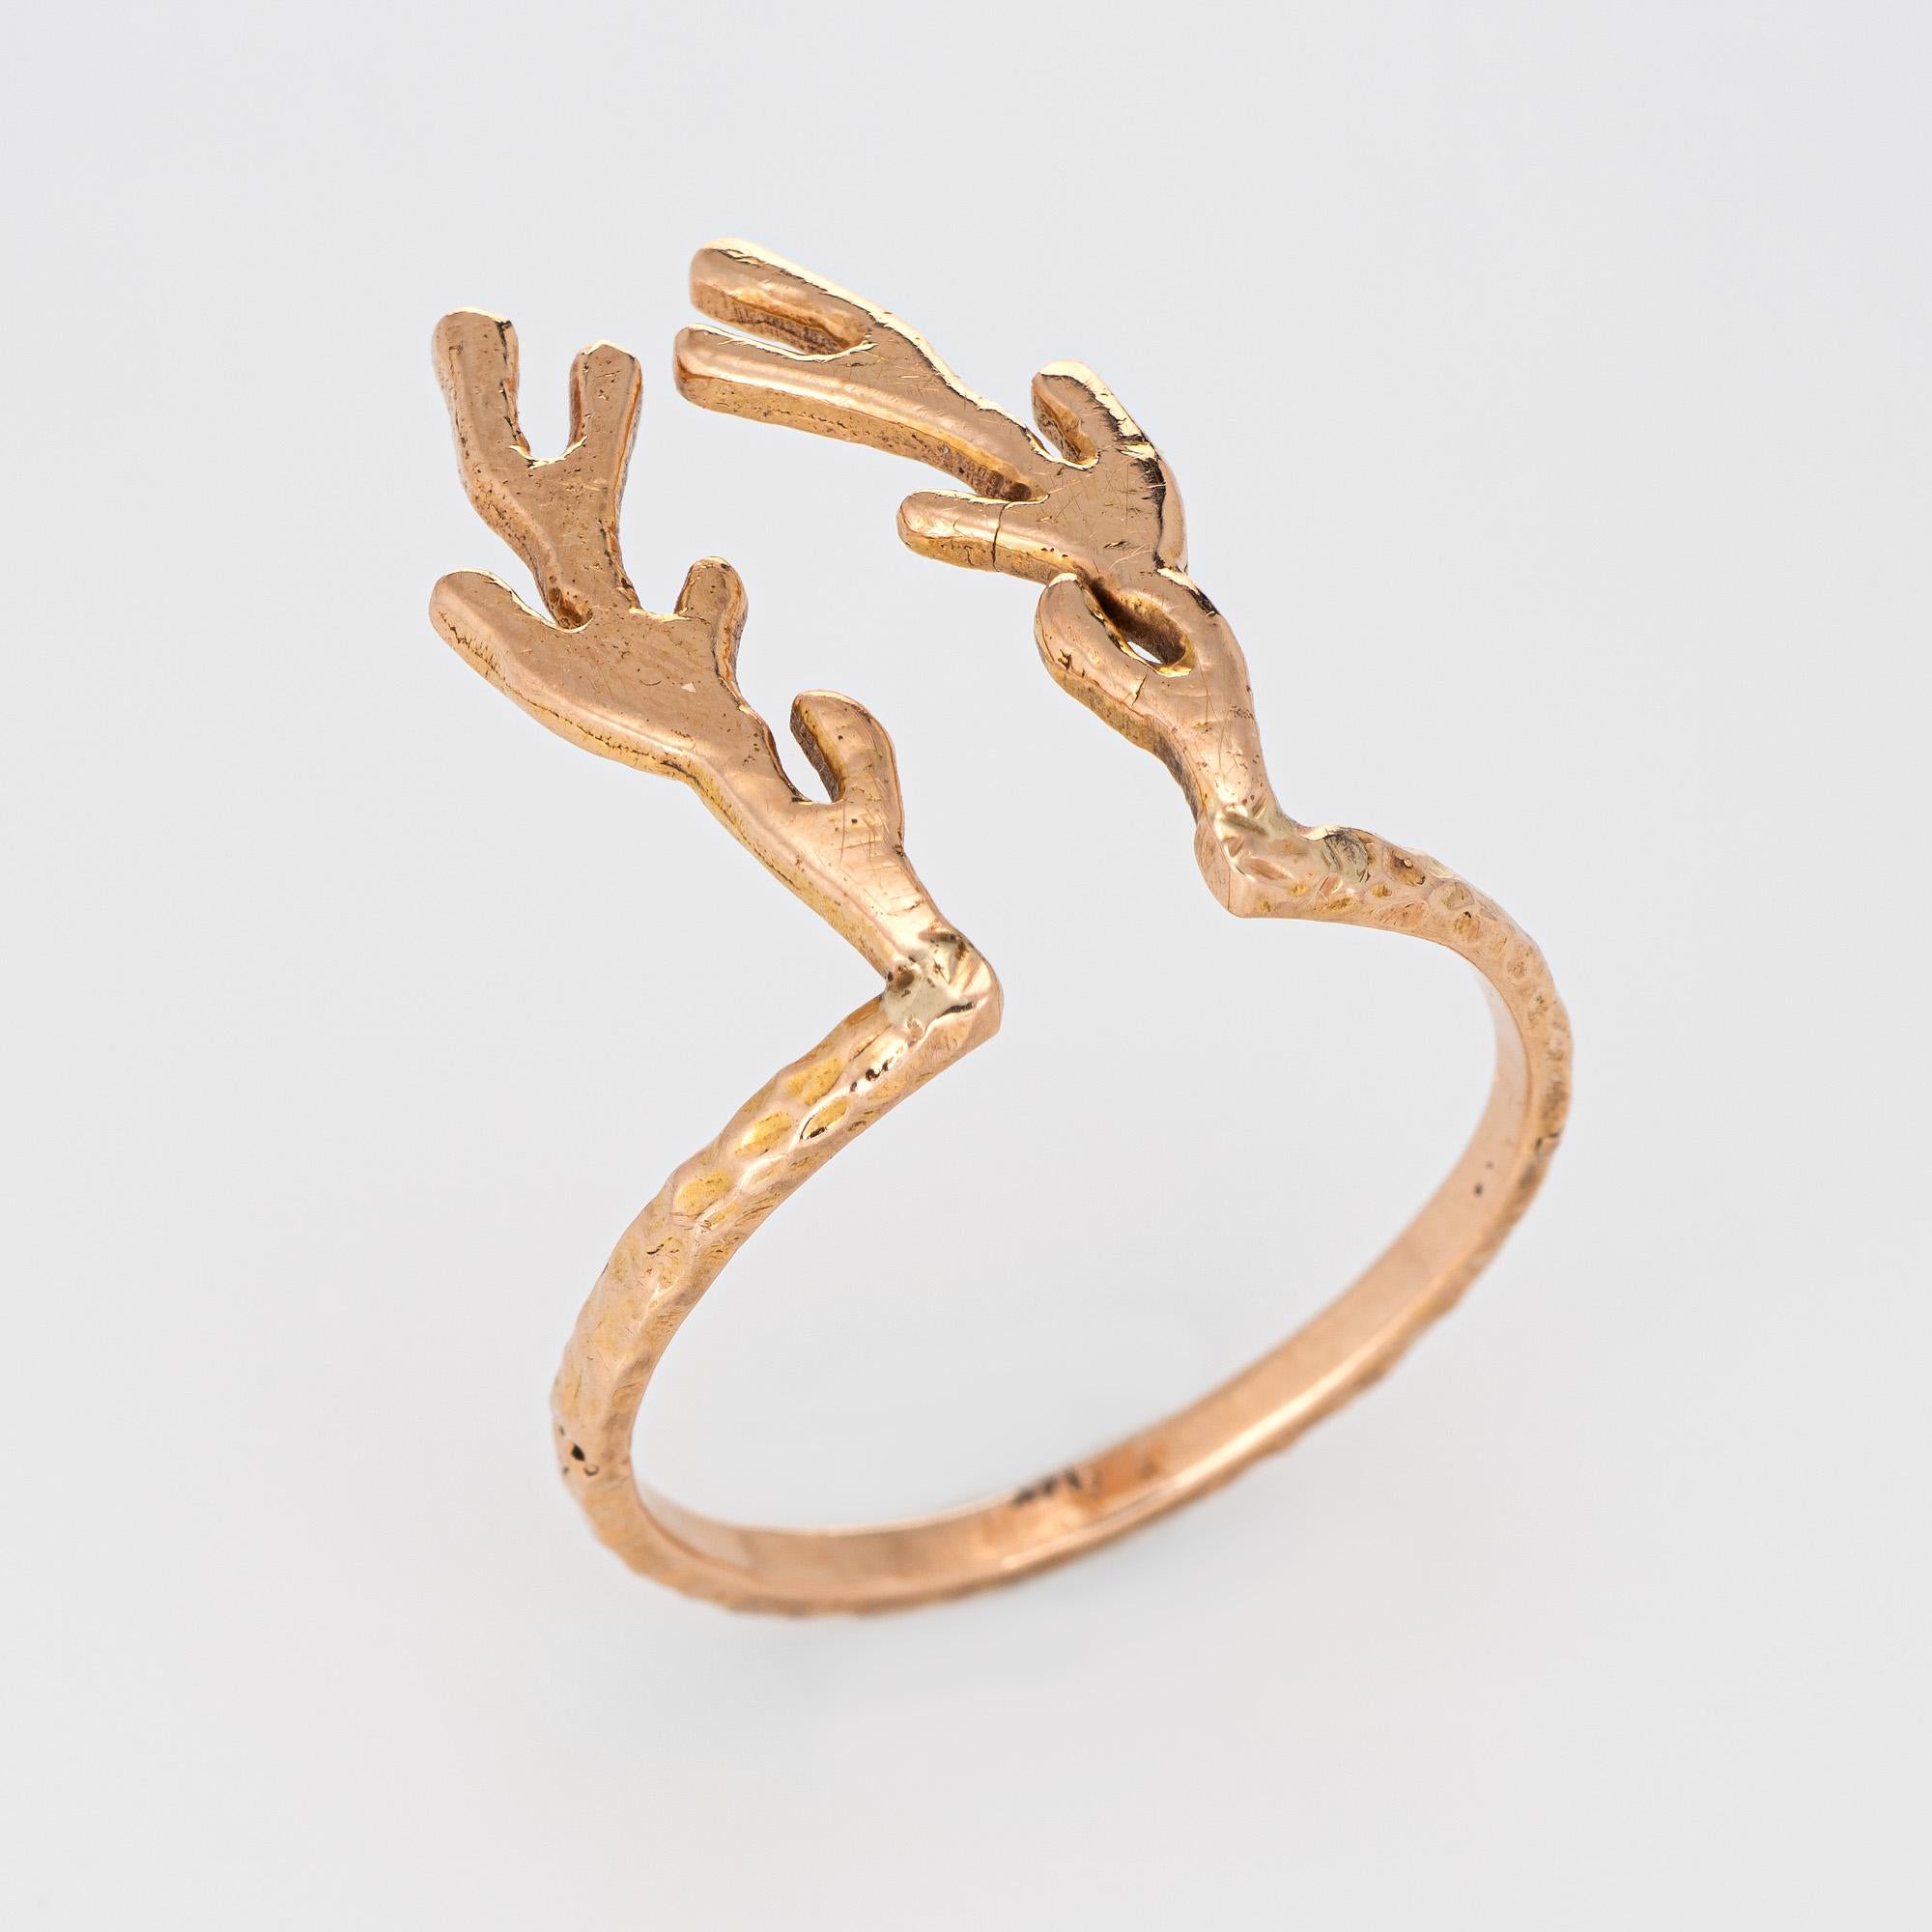 Finely detailed Deer Antler ring crafted in 14 karat rose gold.

The unique ring is crafted in the form of deer antlers, measuring 3/4 inch in length and extending down the knuckle of the finger. A great statement piece of jewelry that sits flat on